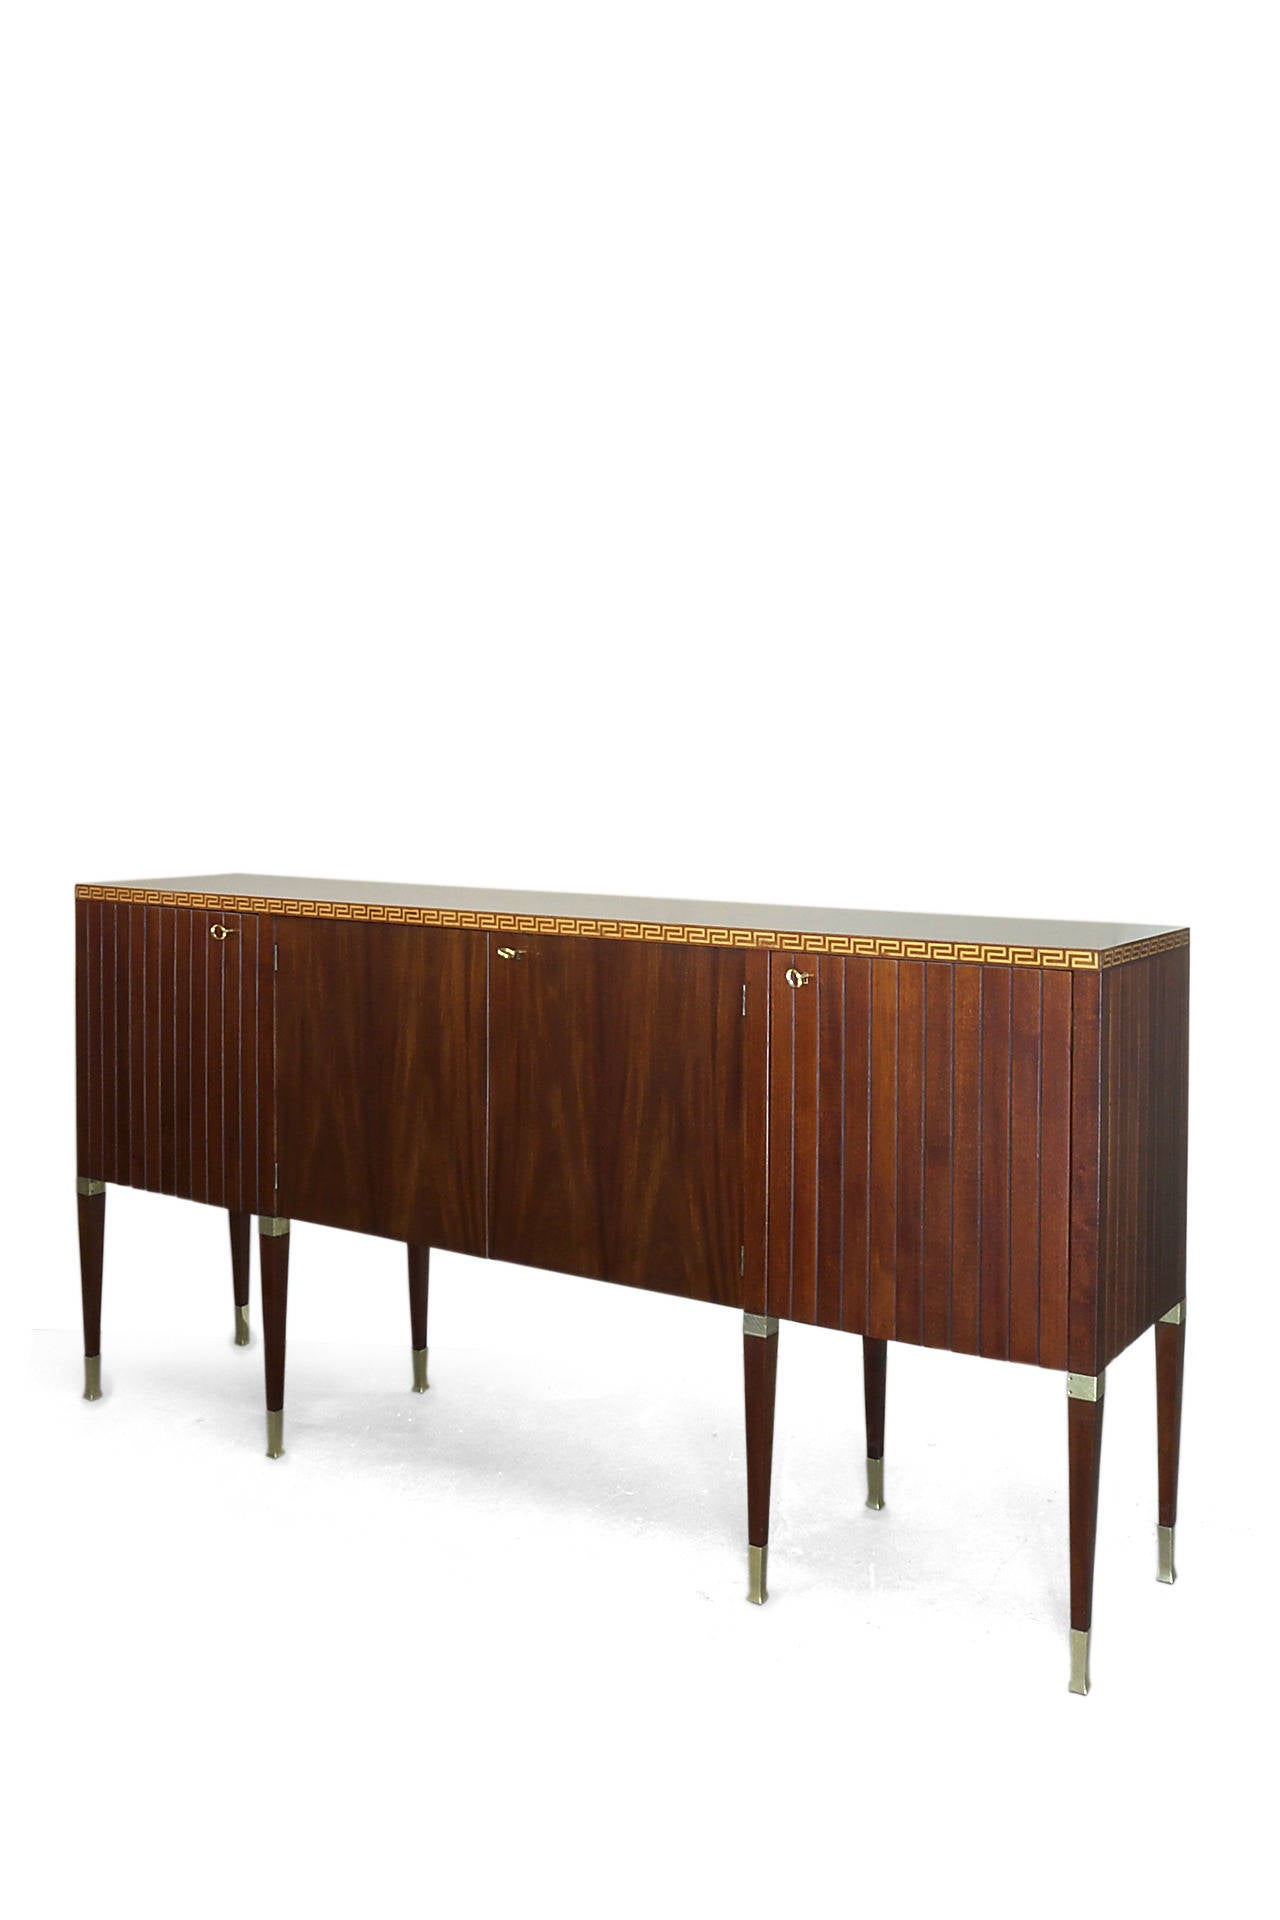 Sideboard of veneered and solid mahogany featuring a maple inlaid Greek key. The eight brass fitted legs of Neo-Liberty style. 

Literature: Roberto Aloi, L'arredamento Moderno IV serie, Milano, 1949, see plate 579 for a similar example.